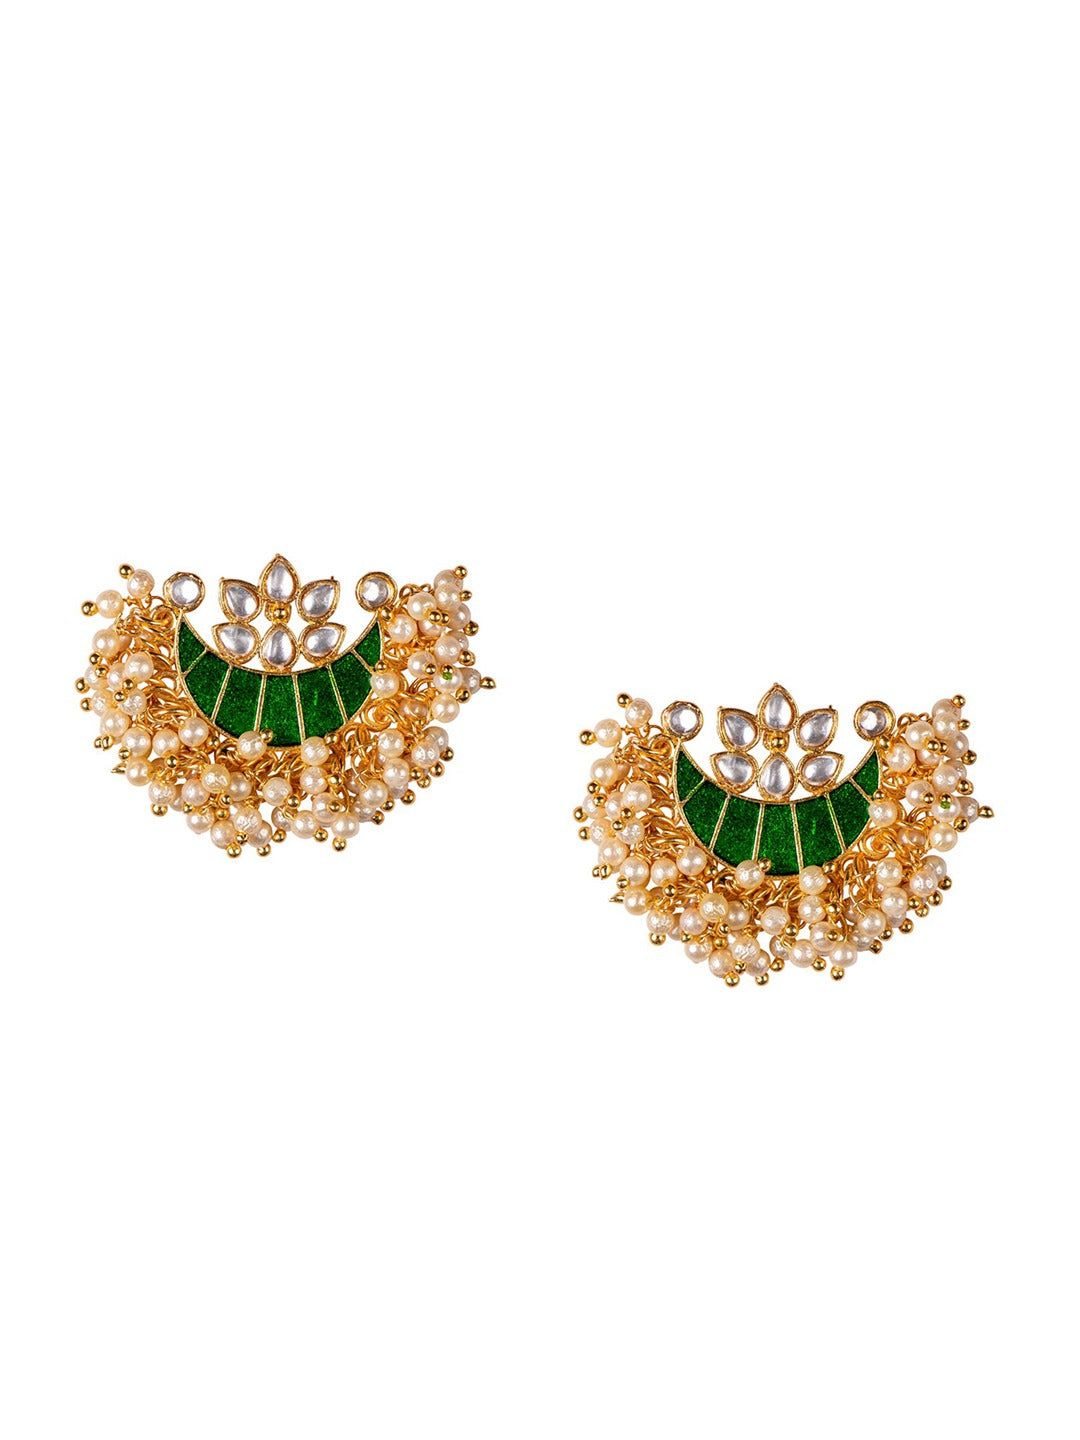 Women's Green & Gold-Toned Contemporary Studs Earrings - Morkanth